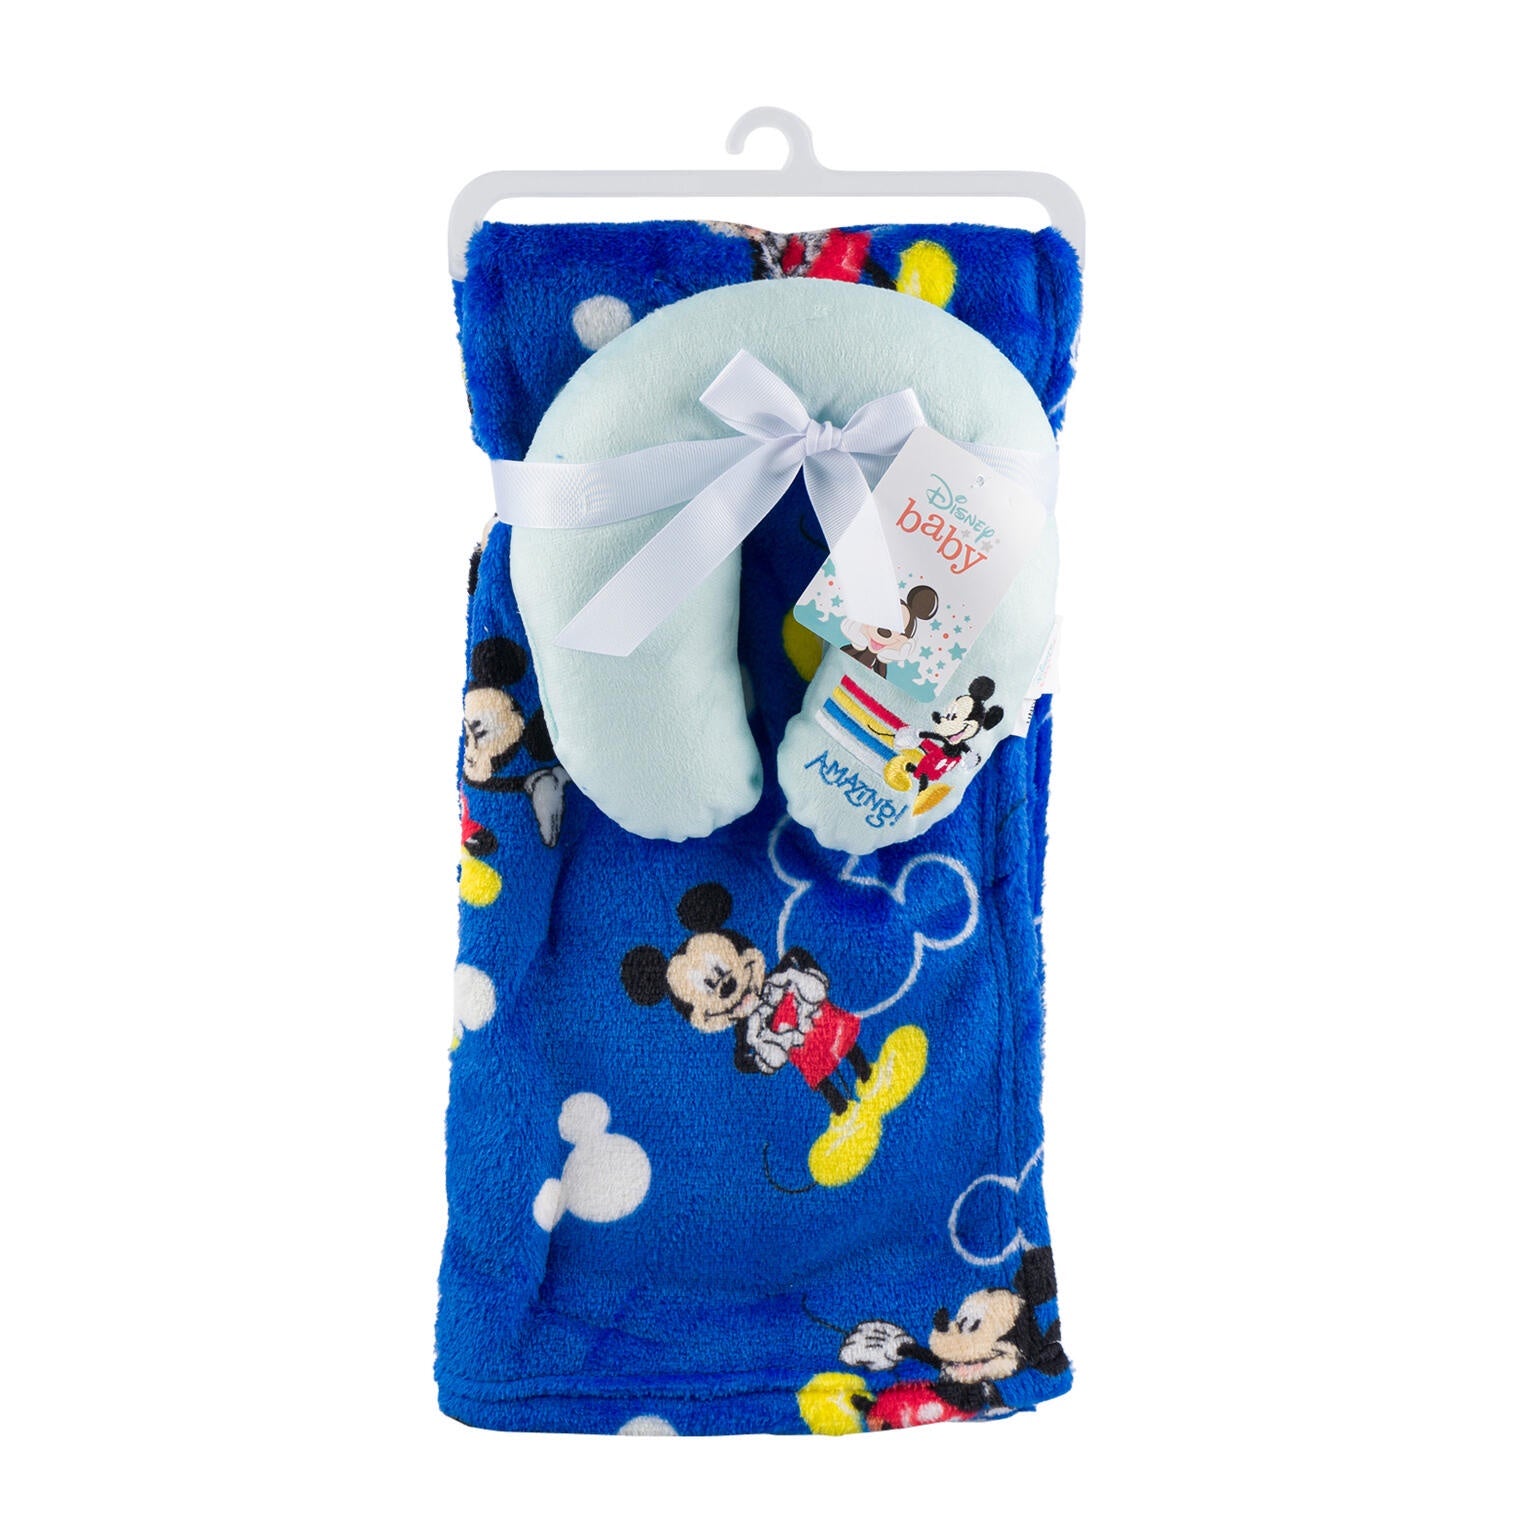 Disney Baby Mickey Mouse Blanket and Headrest Set- Great Headrest Pillow for Travel